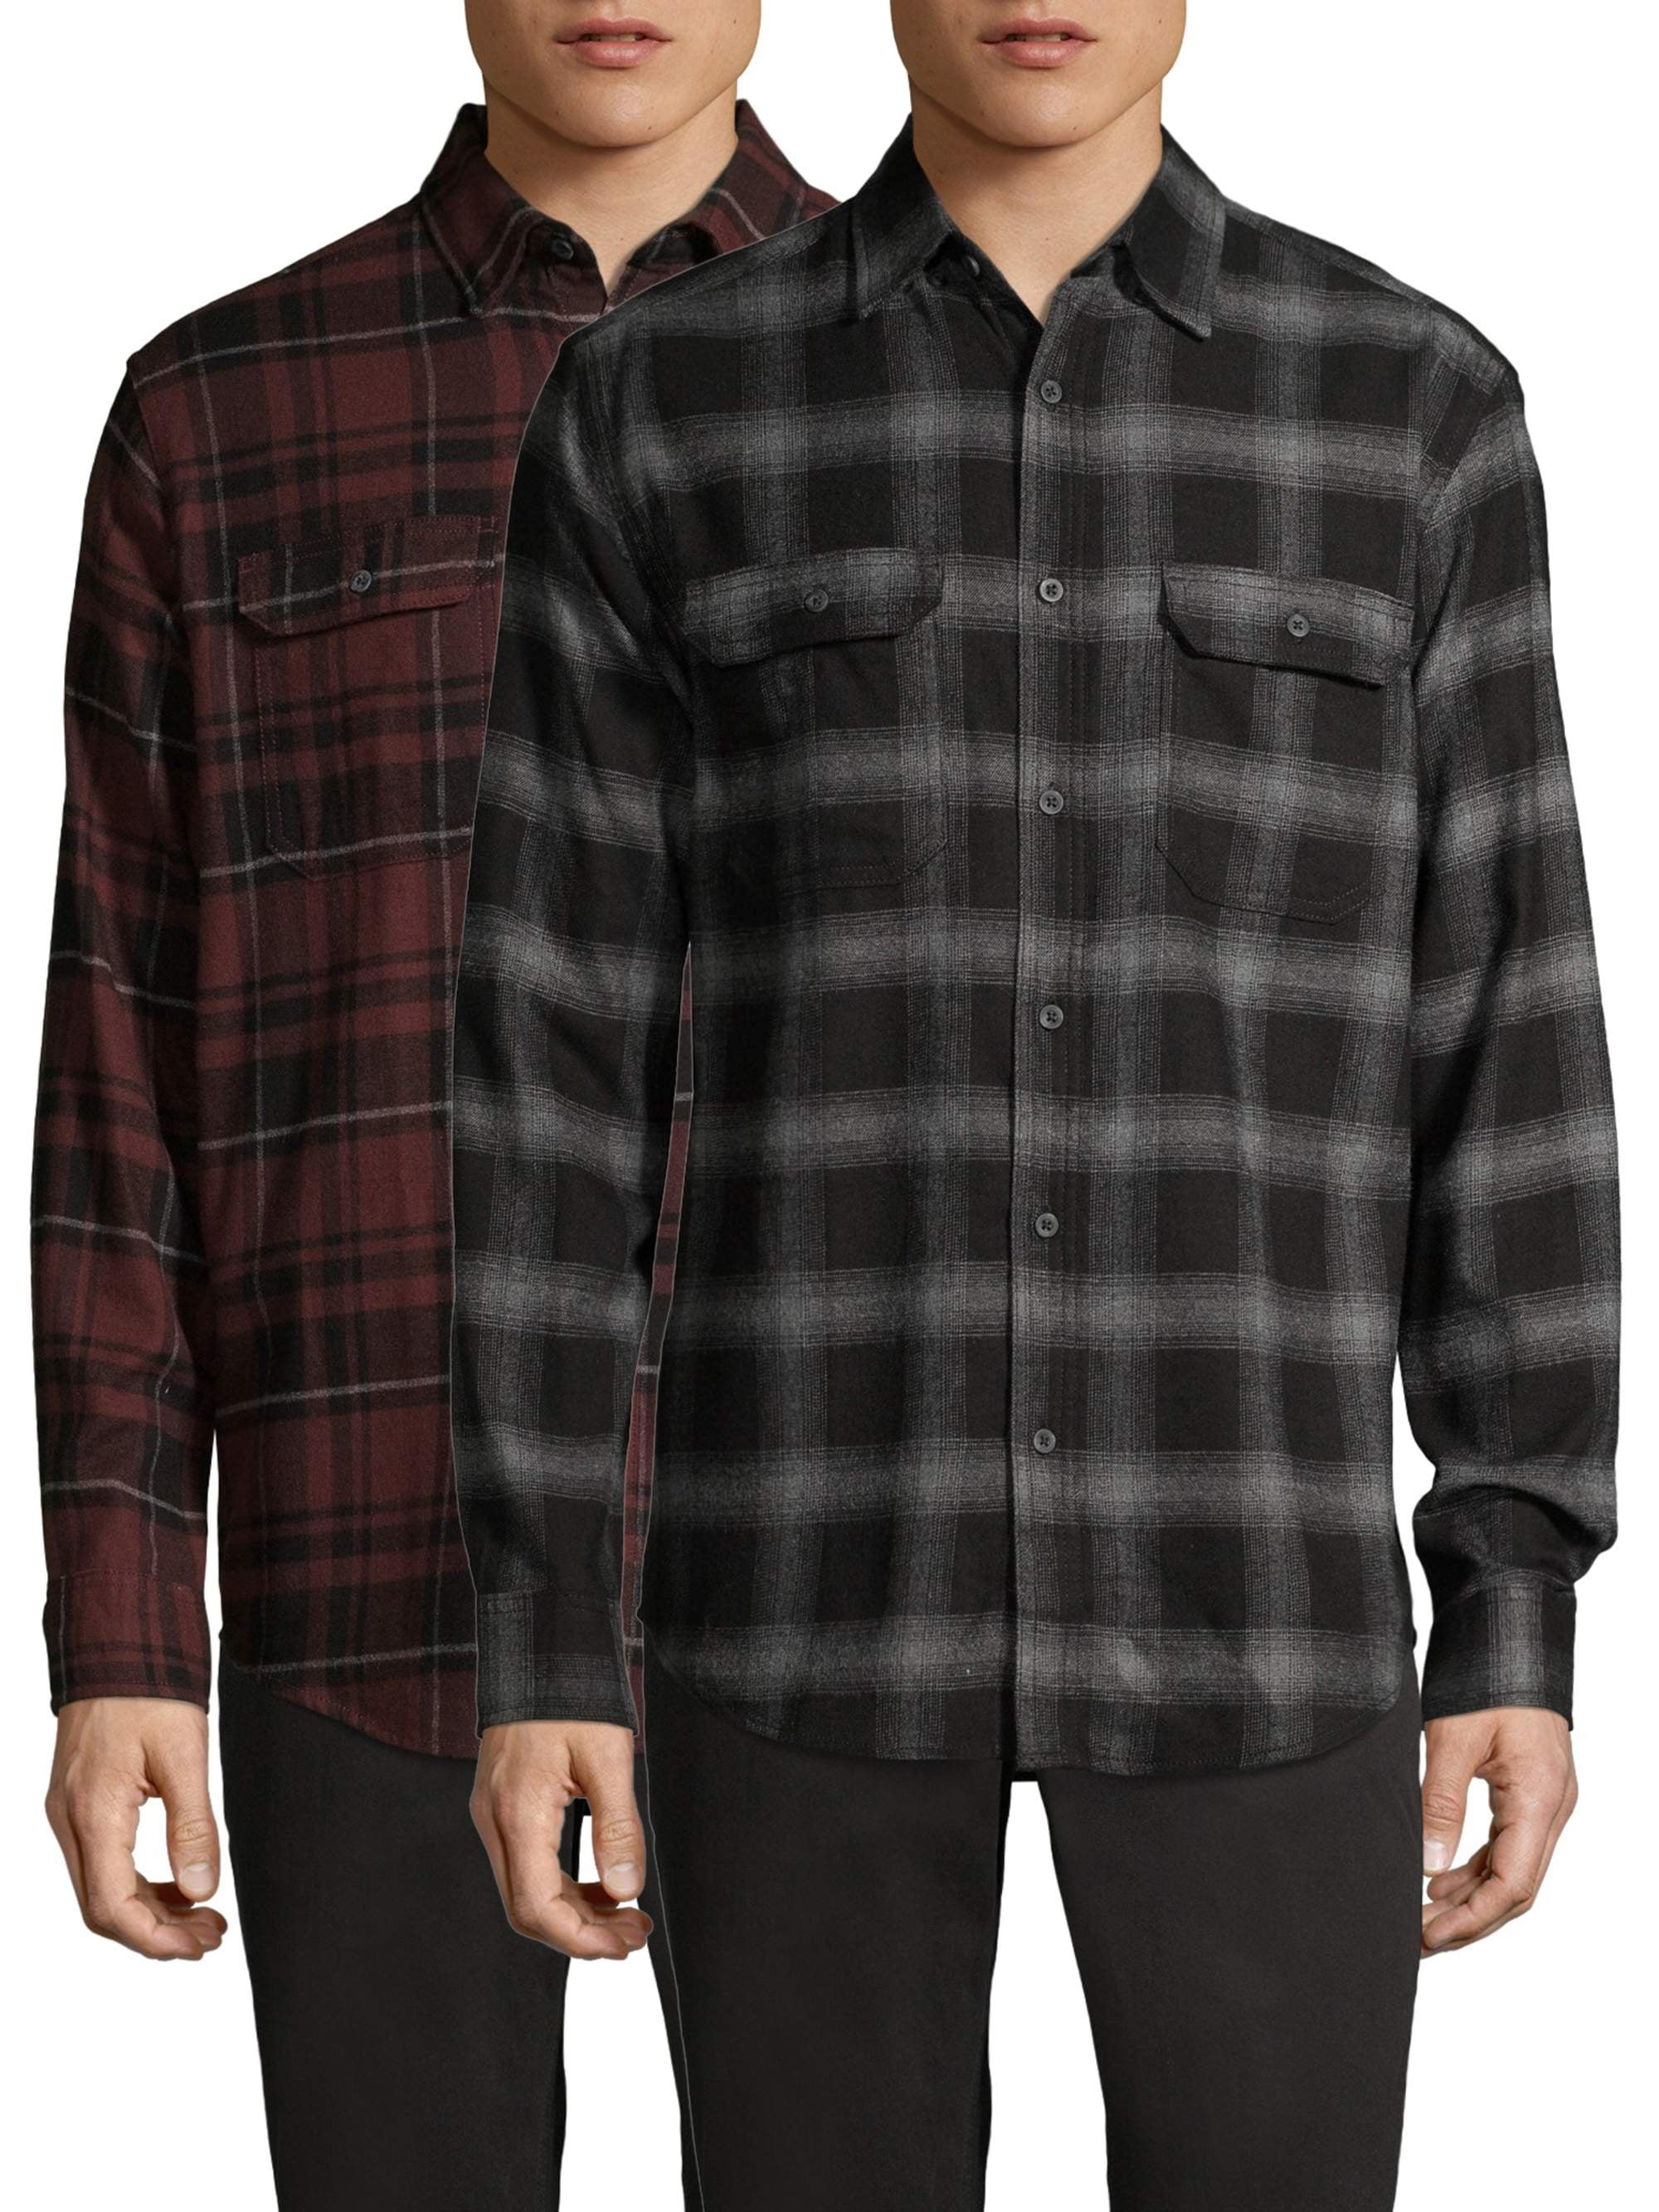 George Men's and Big Men's Flannel 2-Pack, Up to 5XL - Walmart.com